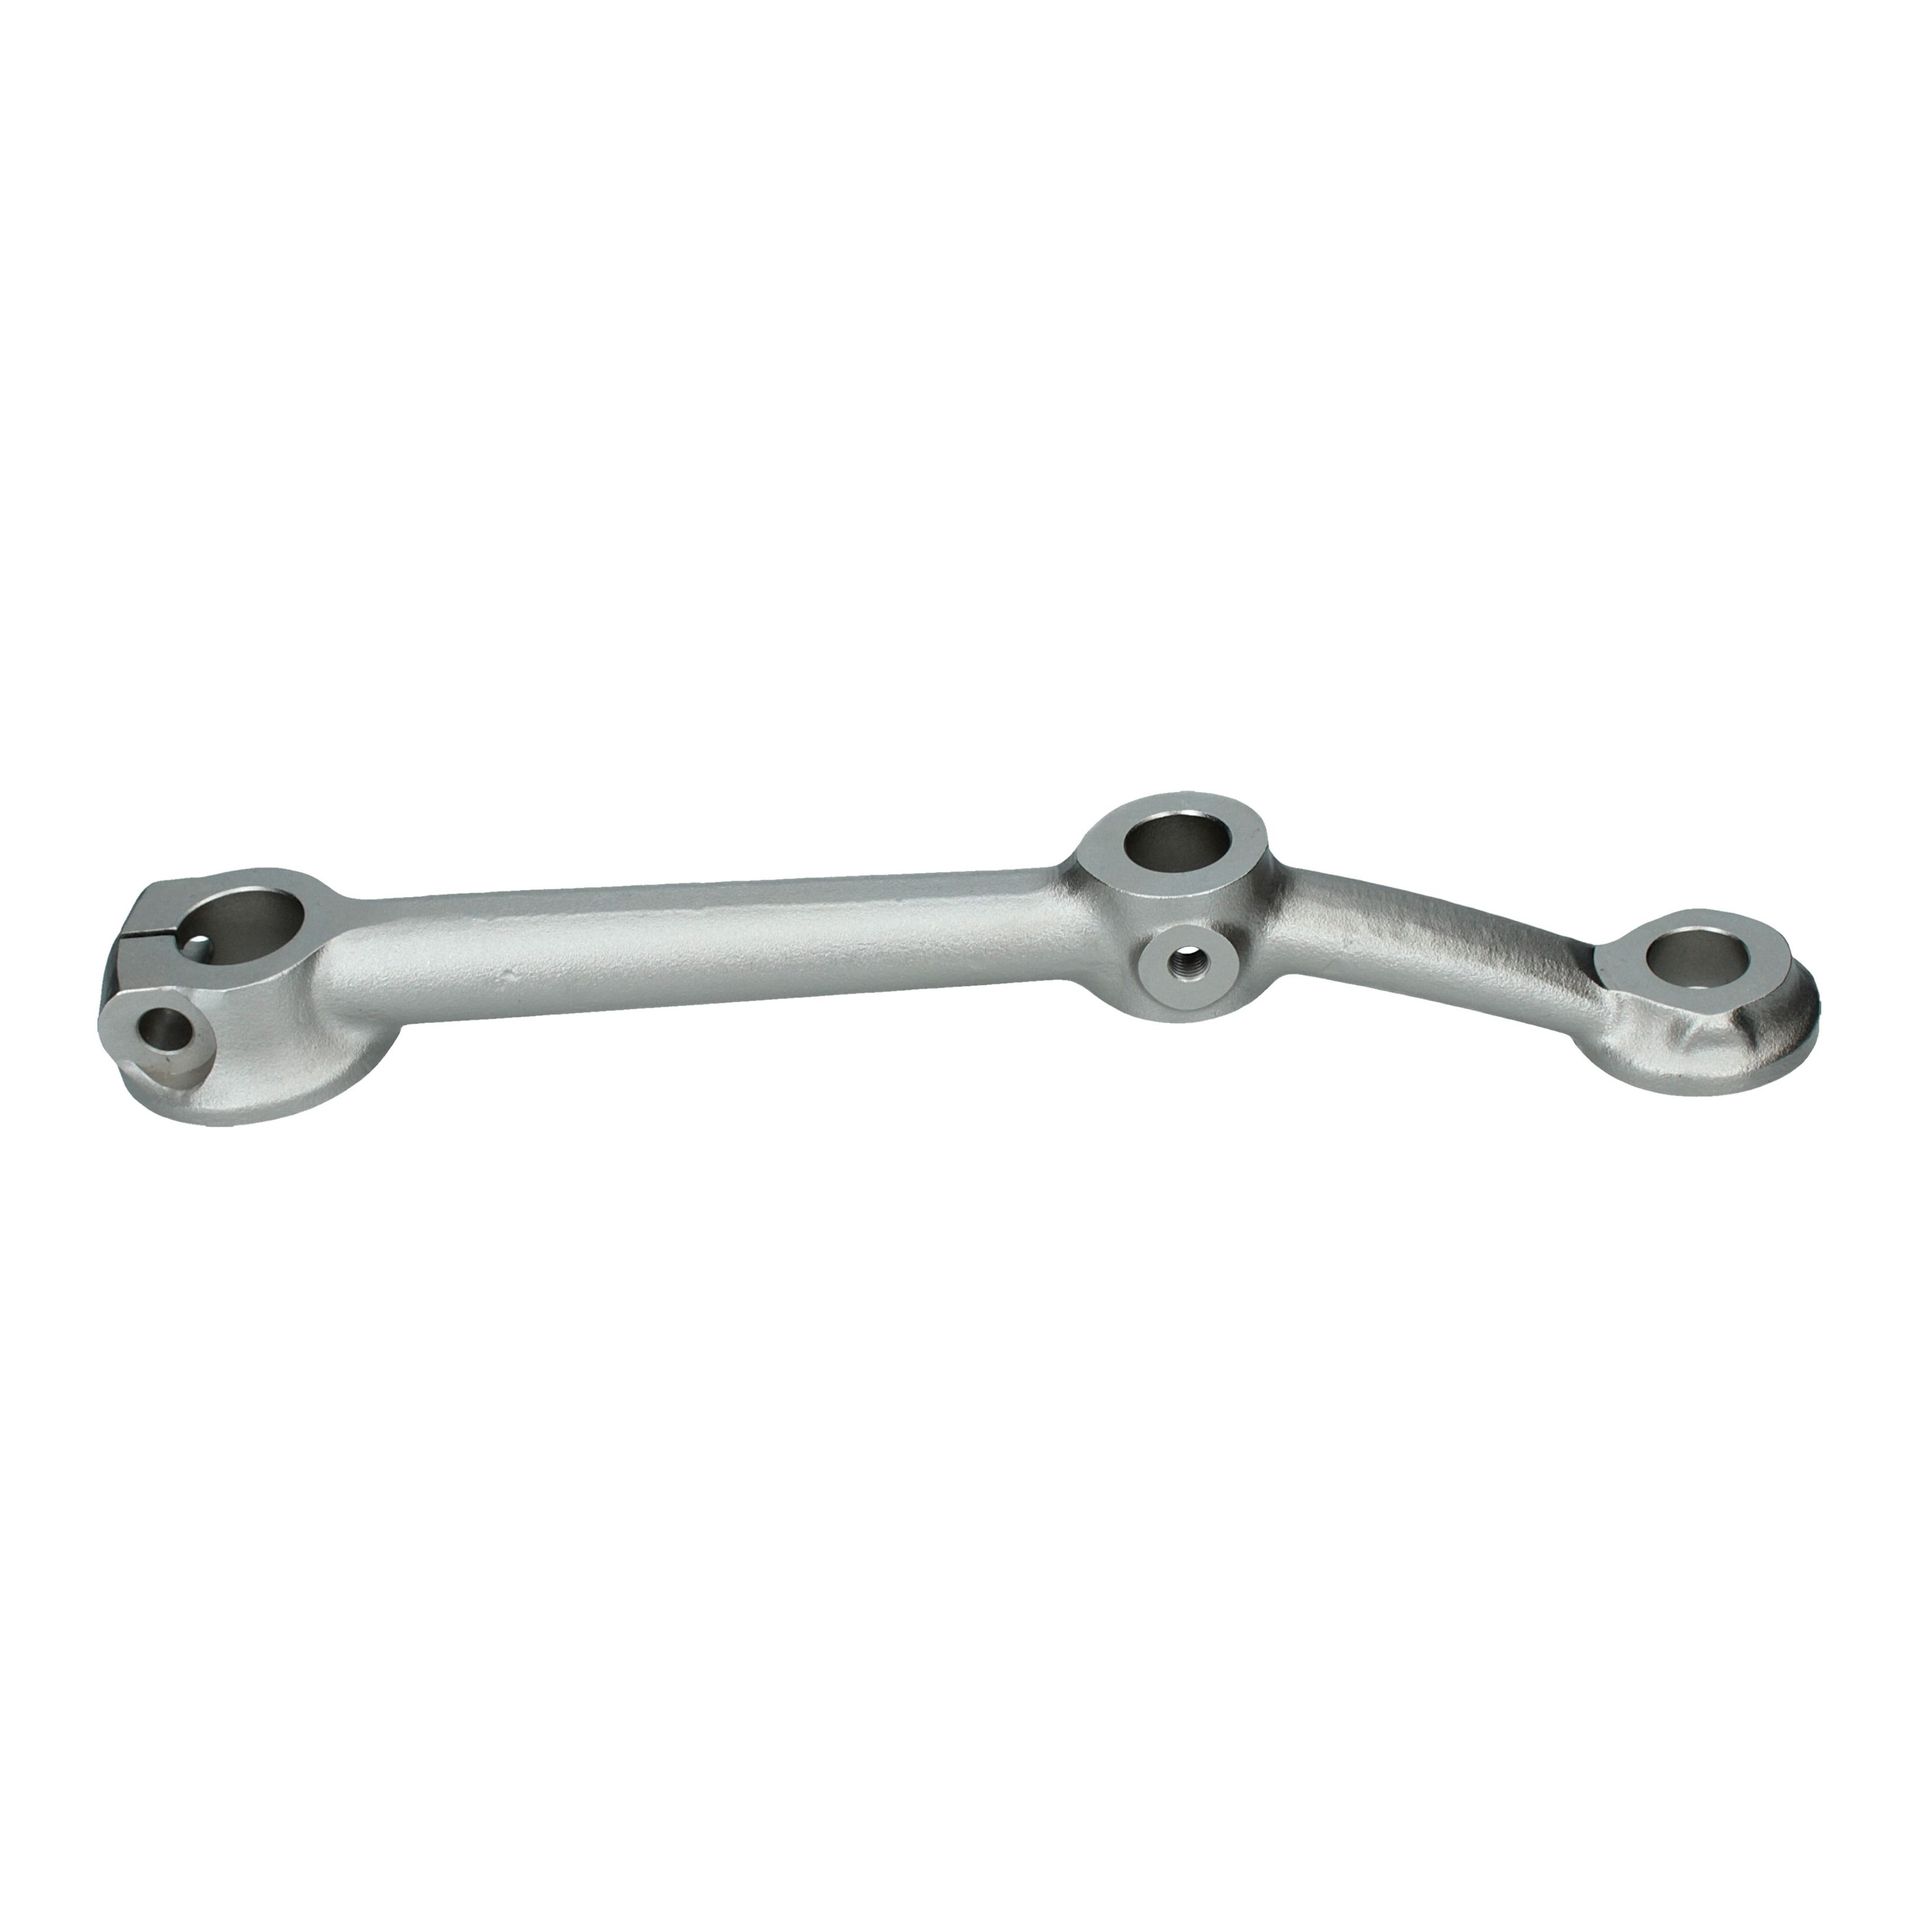 Wishbone Lower [24mm Pin] Curved Early